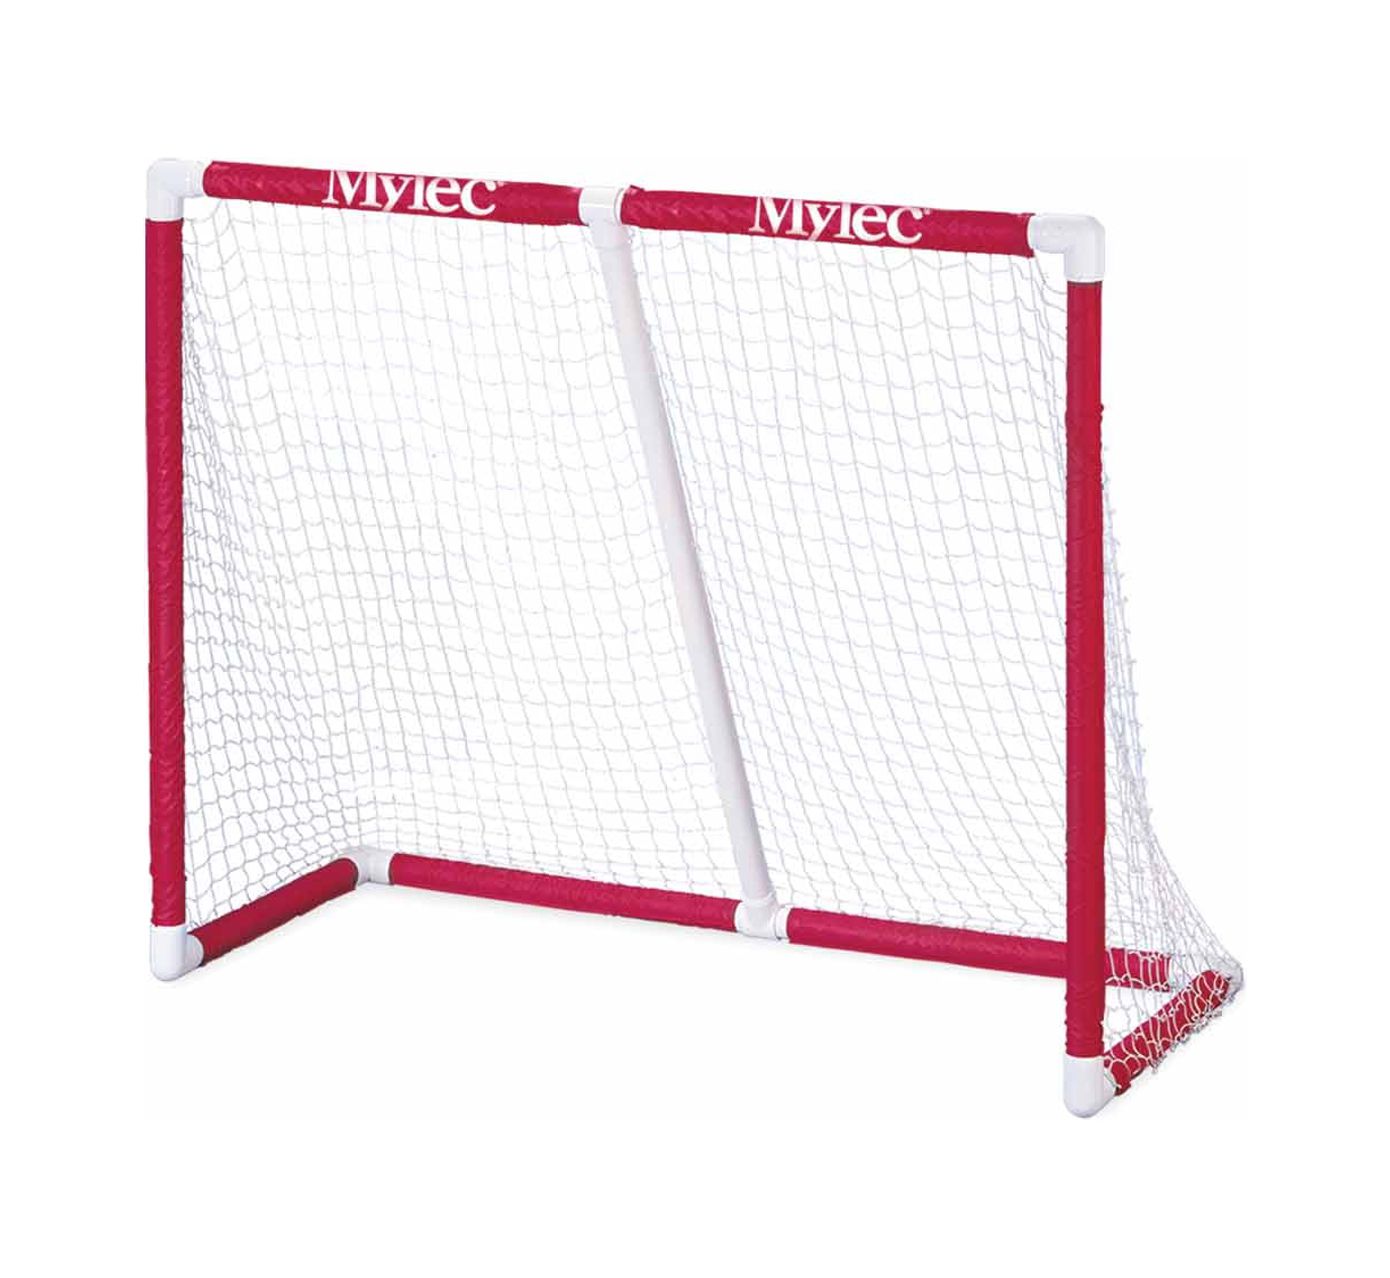 Mylec Easy Assemble Junior PVC Hockey Goal for Indoor + Outdoor - 54"W x 44"H x 24"D - 15 Pounds - Light + Portable - image 1 of 3